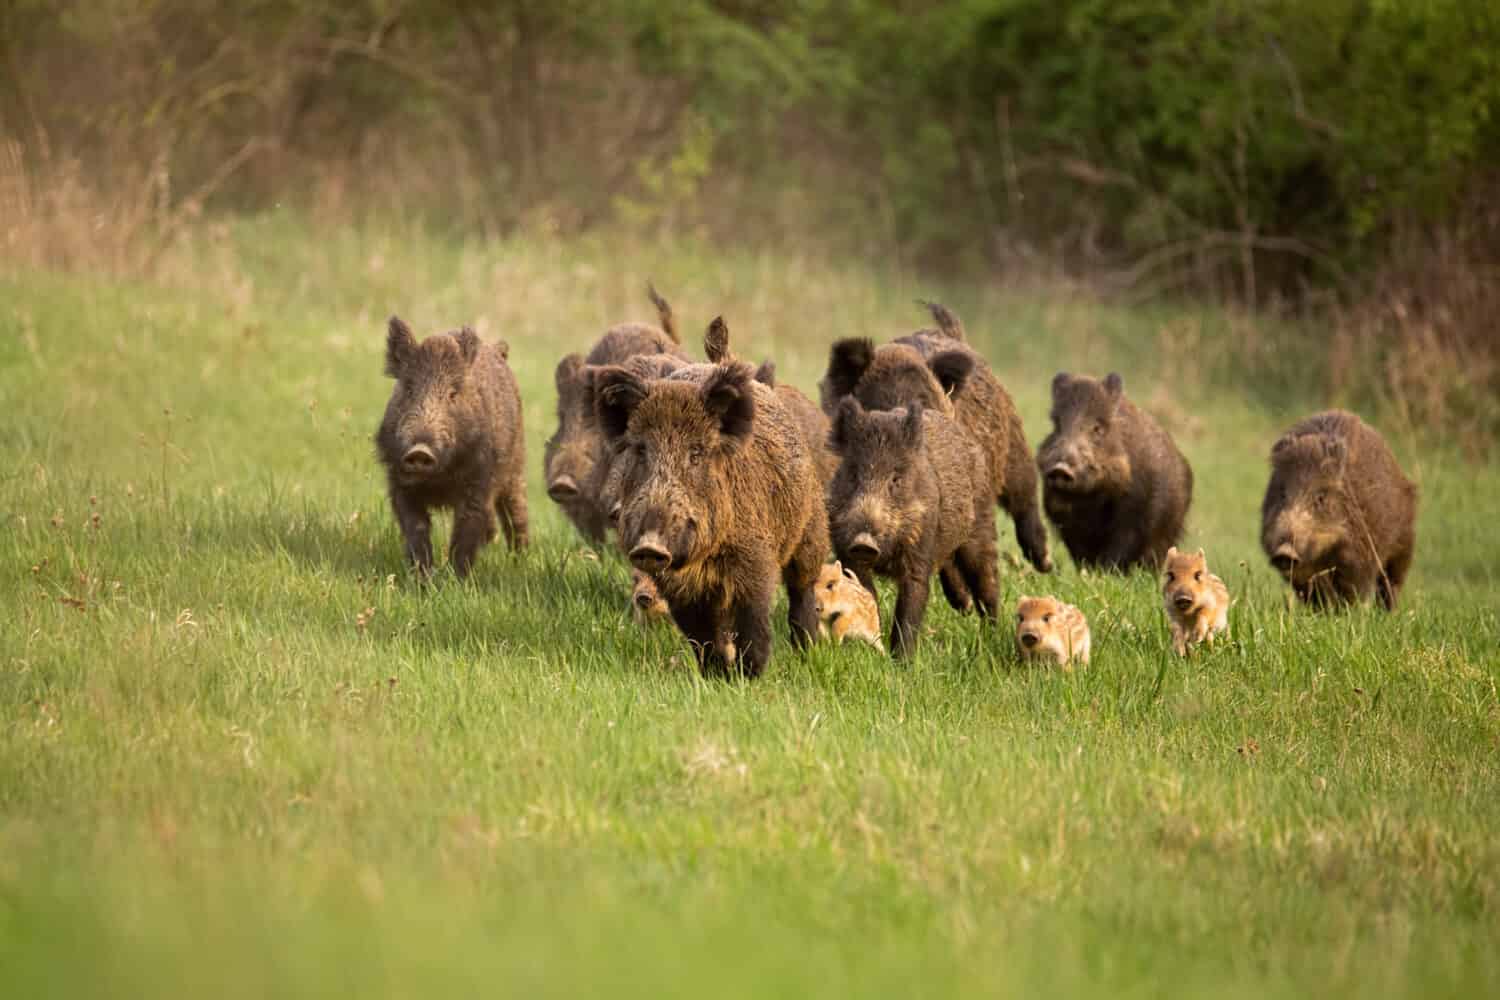 Group of wild boars, sus scrofa, running in spring nature. Action wildlife scenery of a family with small piglets moving fast forward to escape from danger.